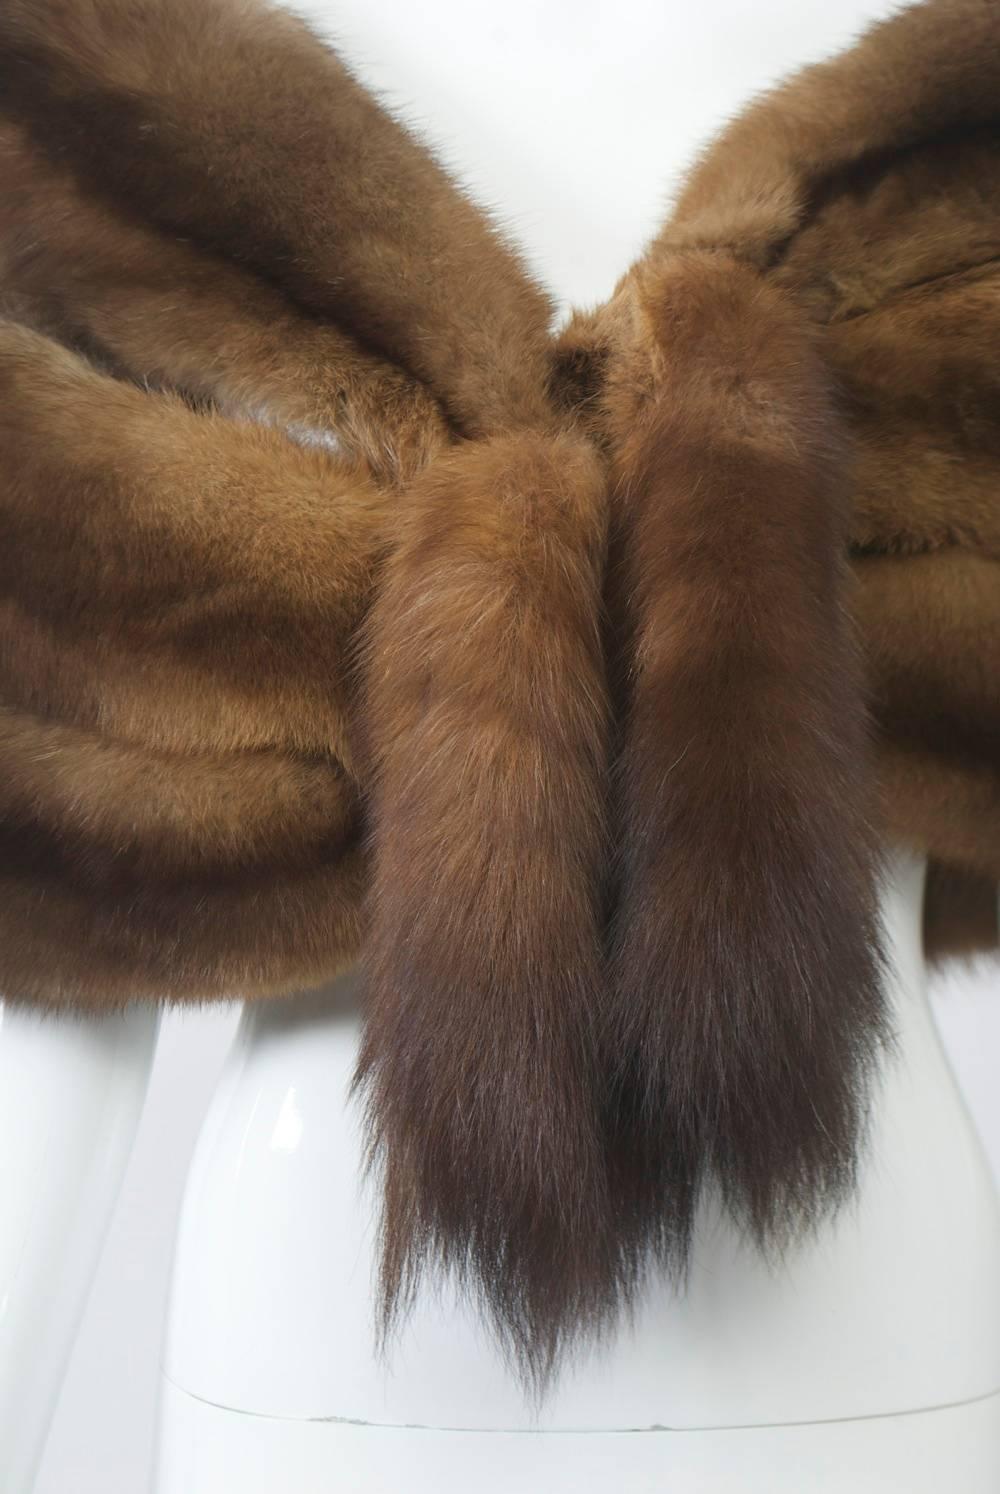 Triple-pelt sable stole, c.1950s, the three skins loosely connected and finished with tails at closure, which features chain and snap as well as fur hook. Continuous sable skins on reverse side. Skins are supple and full.